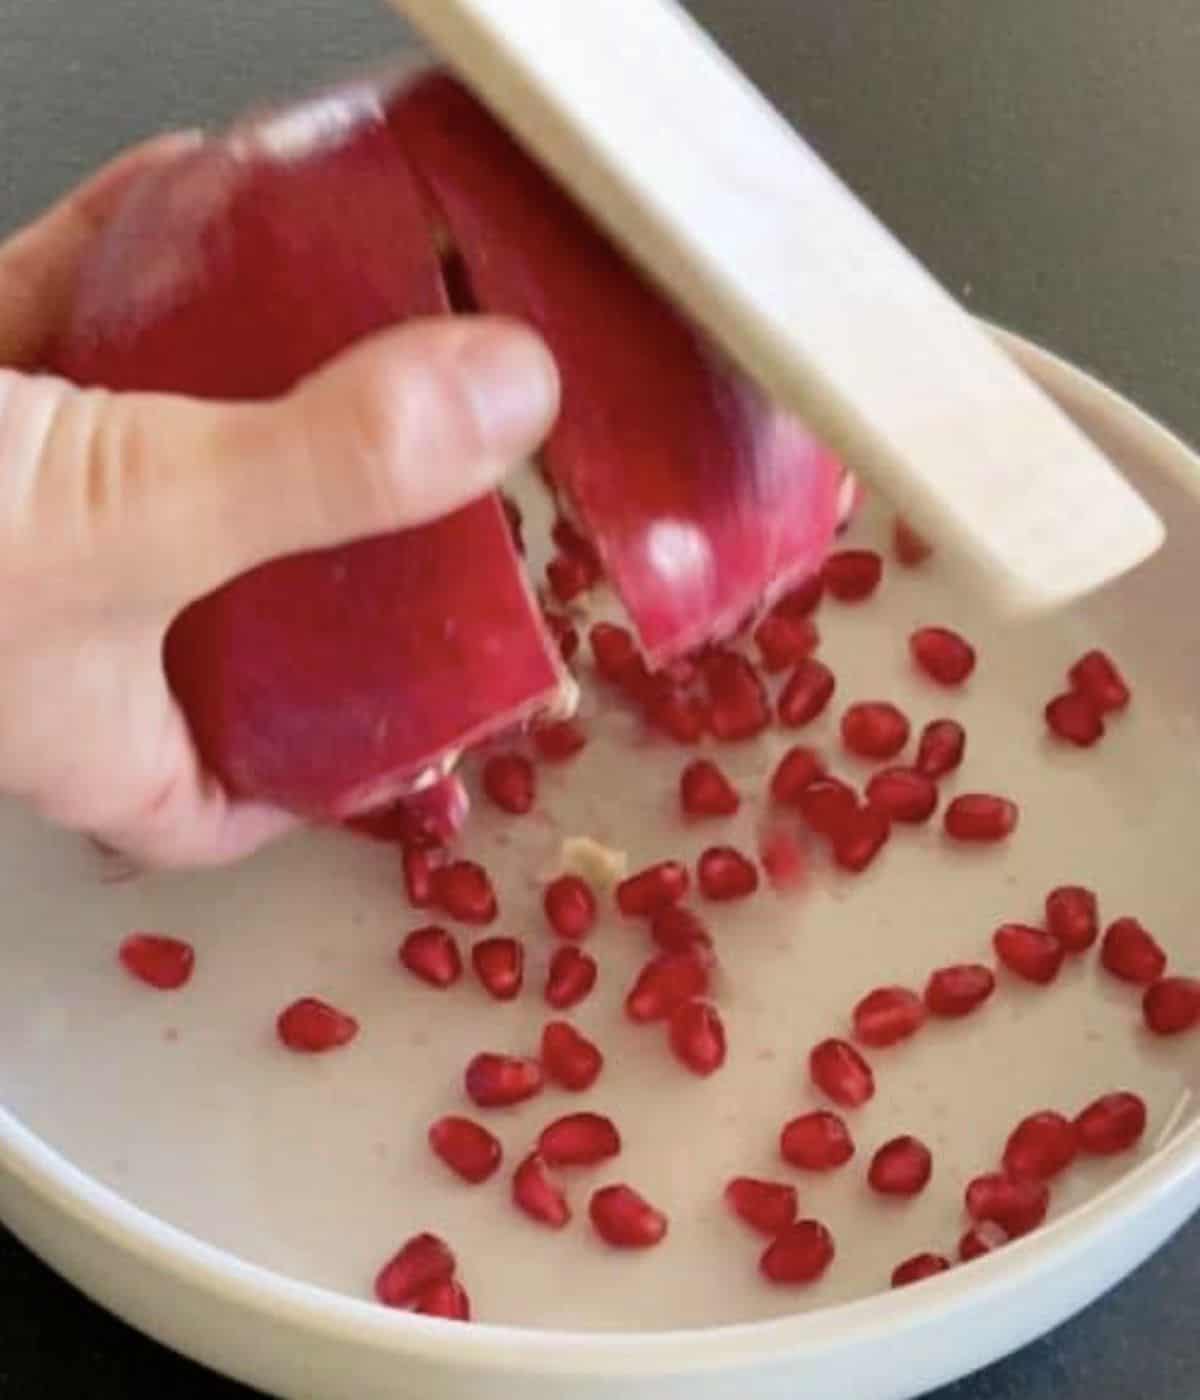 Wooden spoon hitting pomegranate.